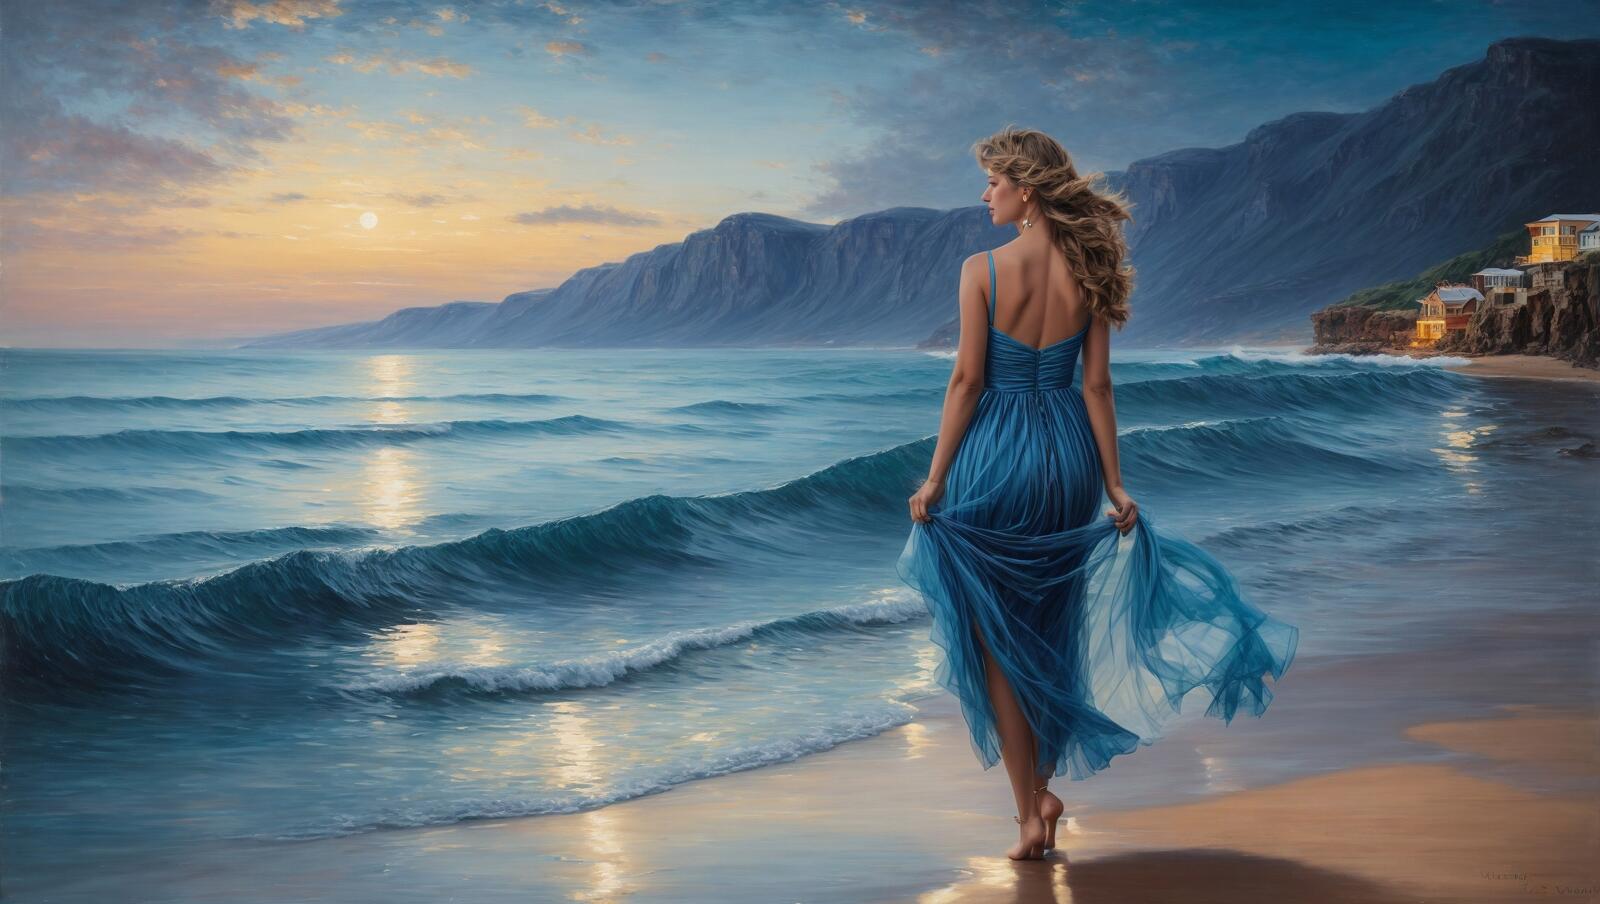 Free photo A painting of a woman in a blue dress walking on the beach